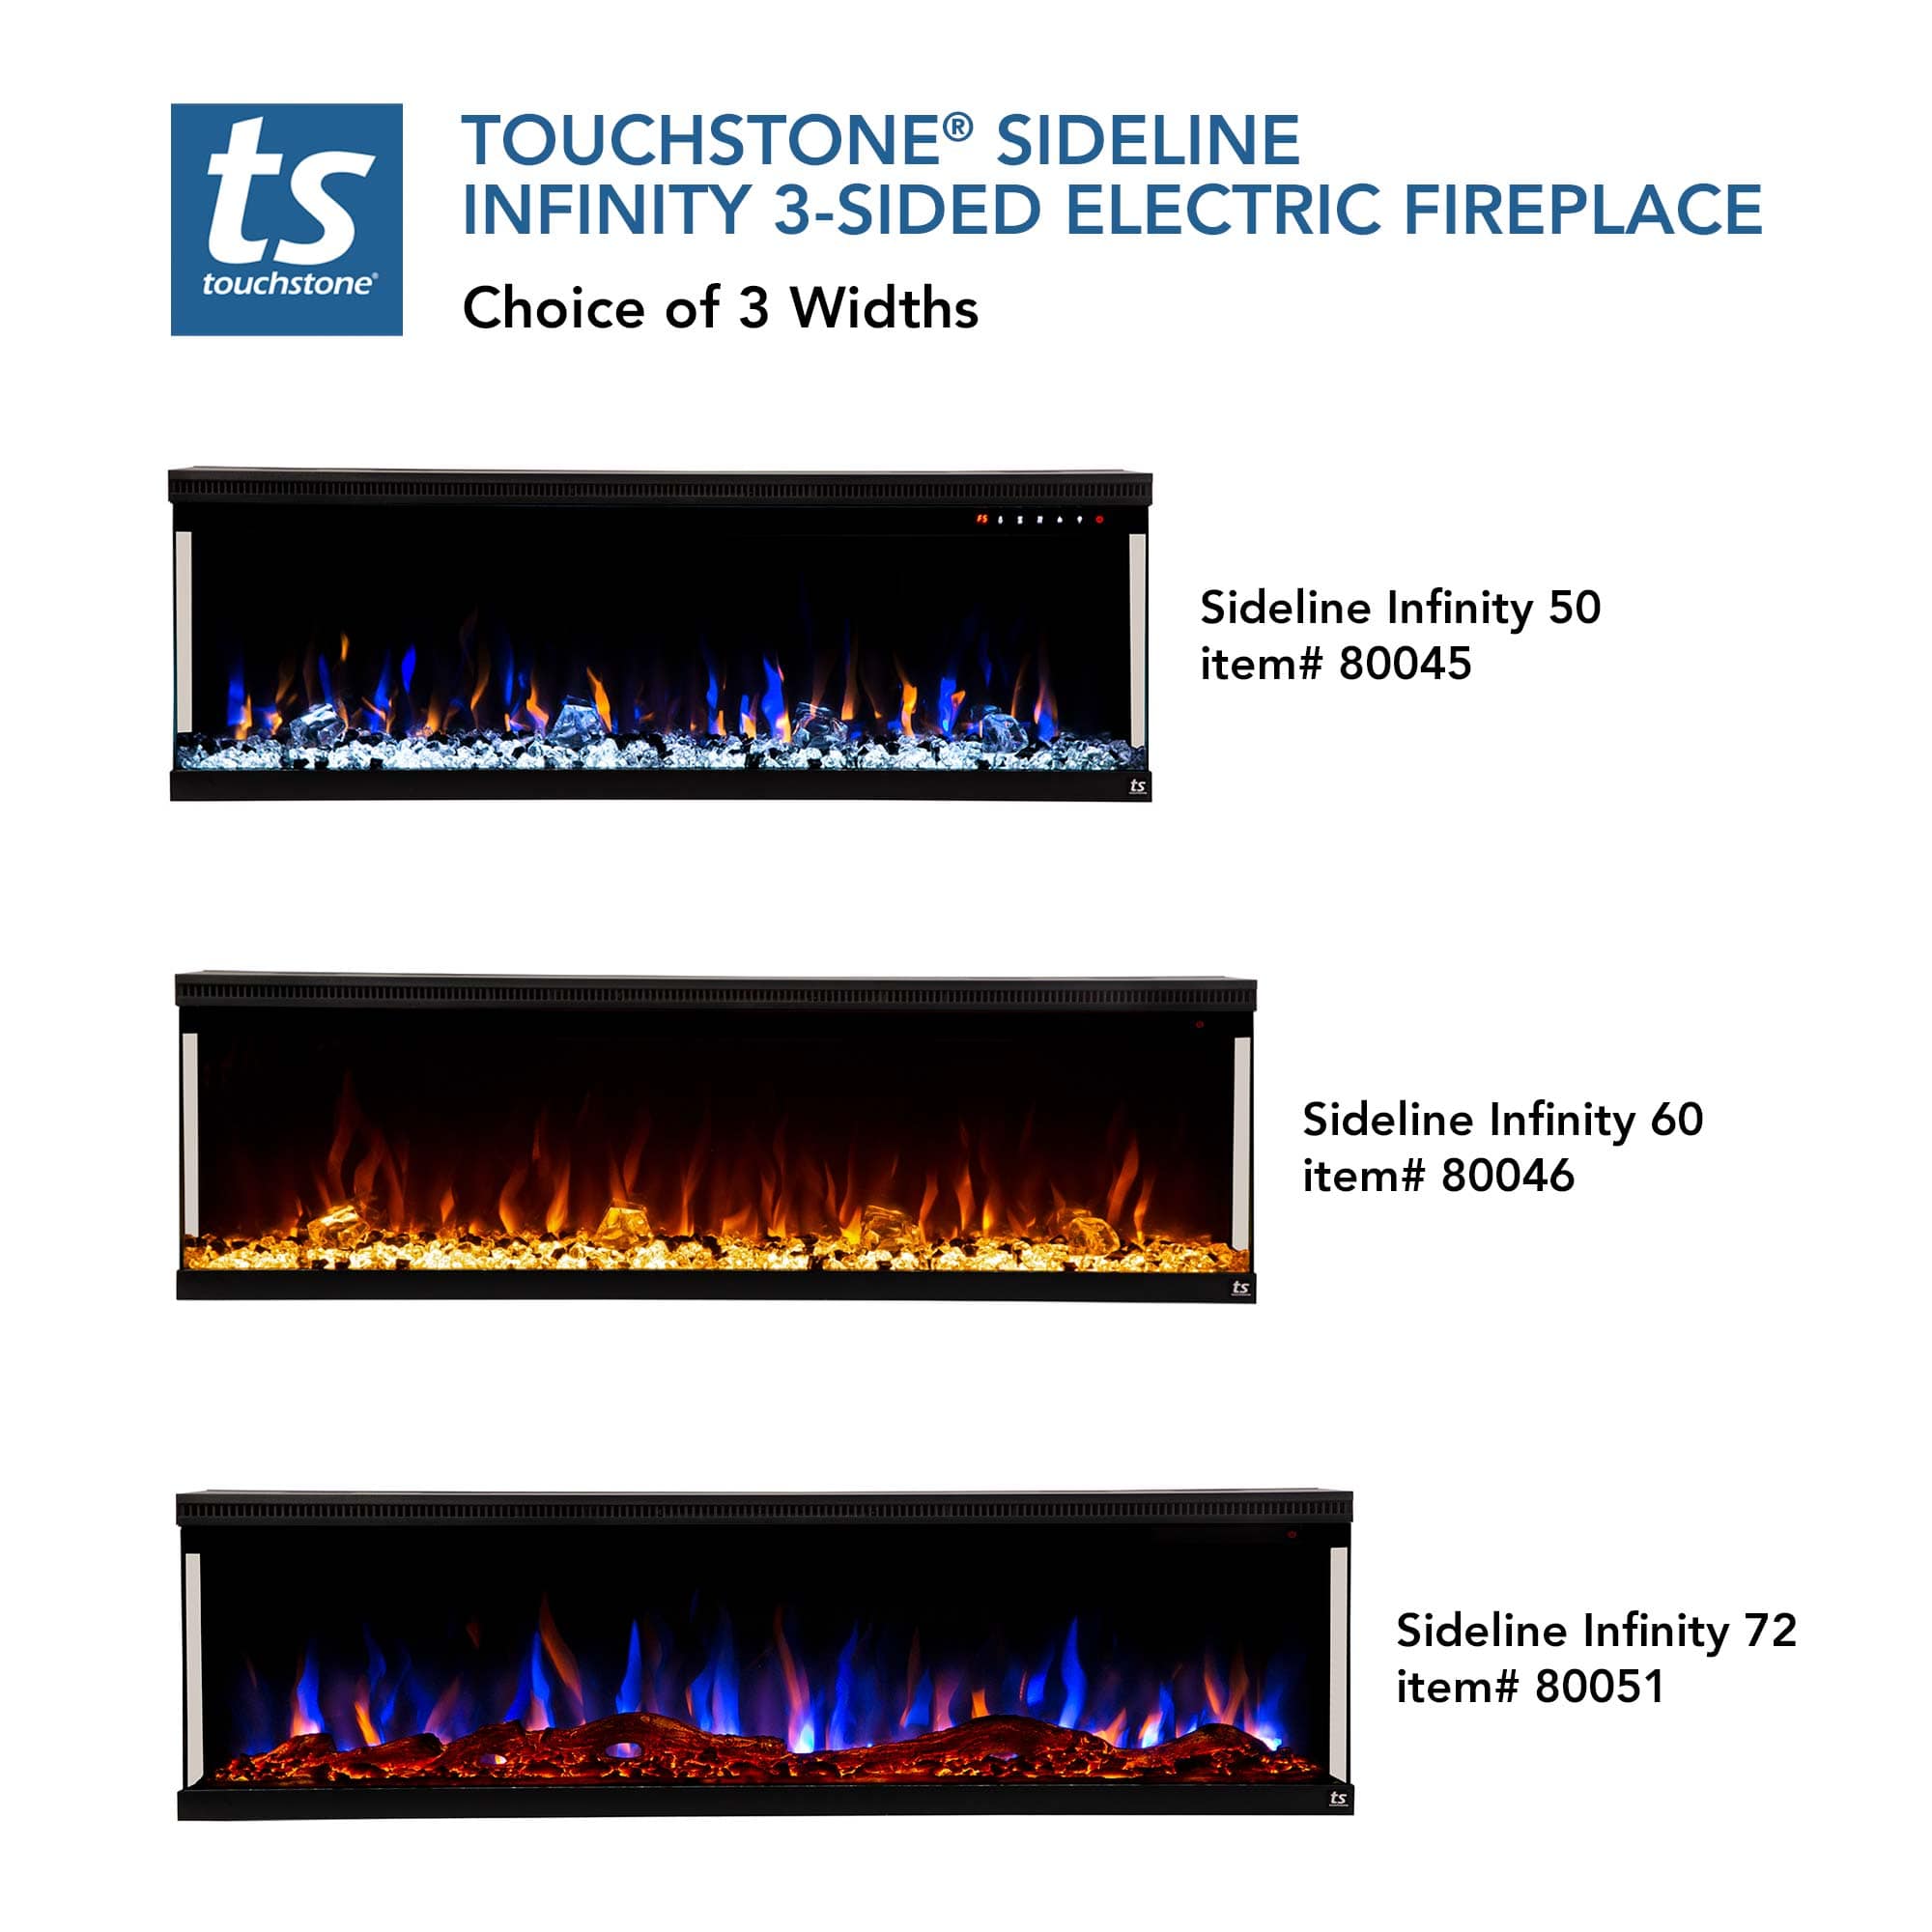 Sideline Infinity available in three widths